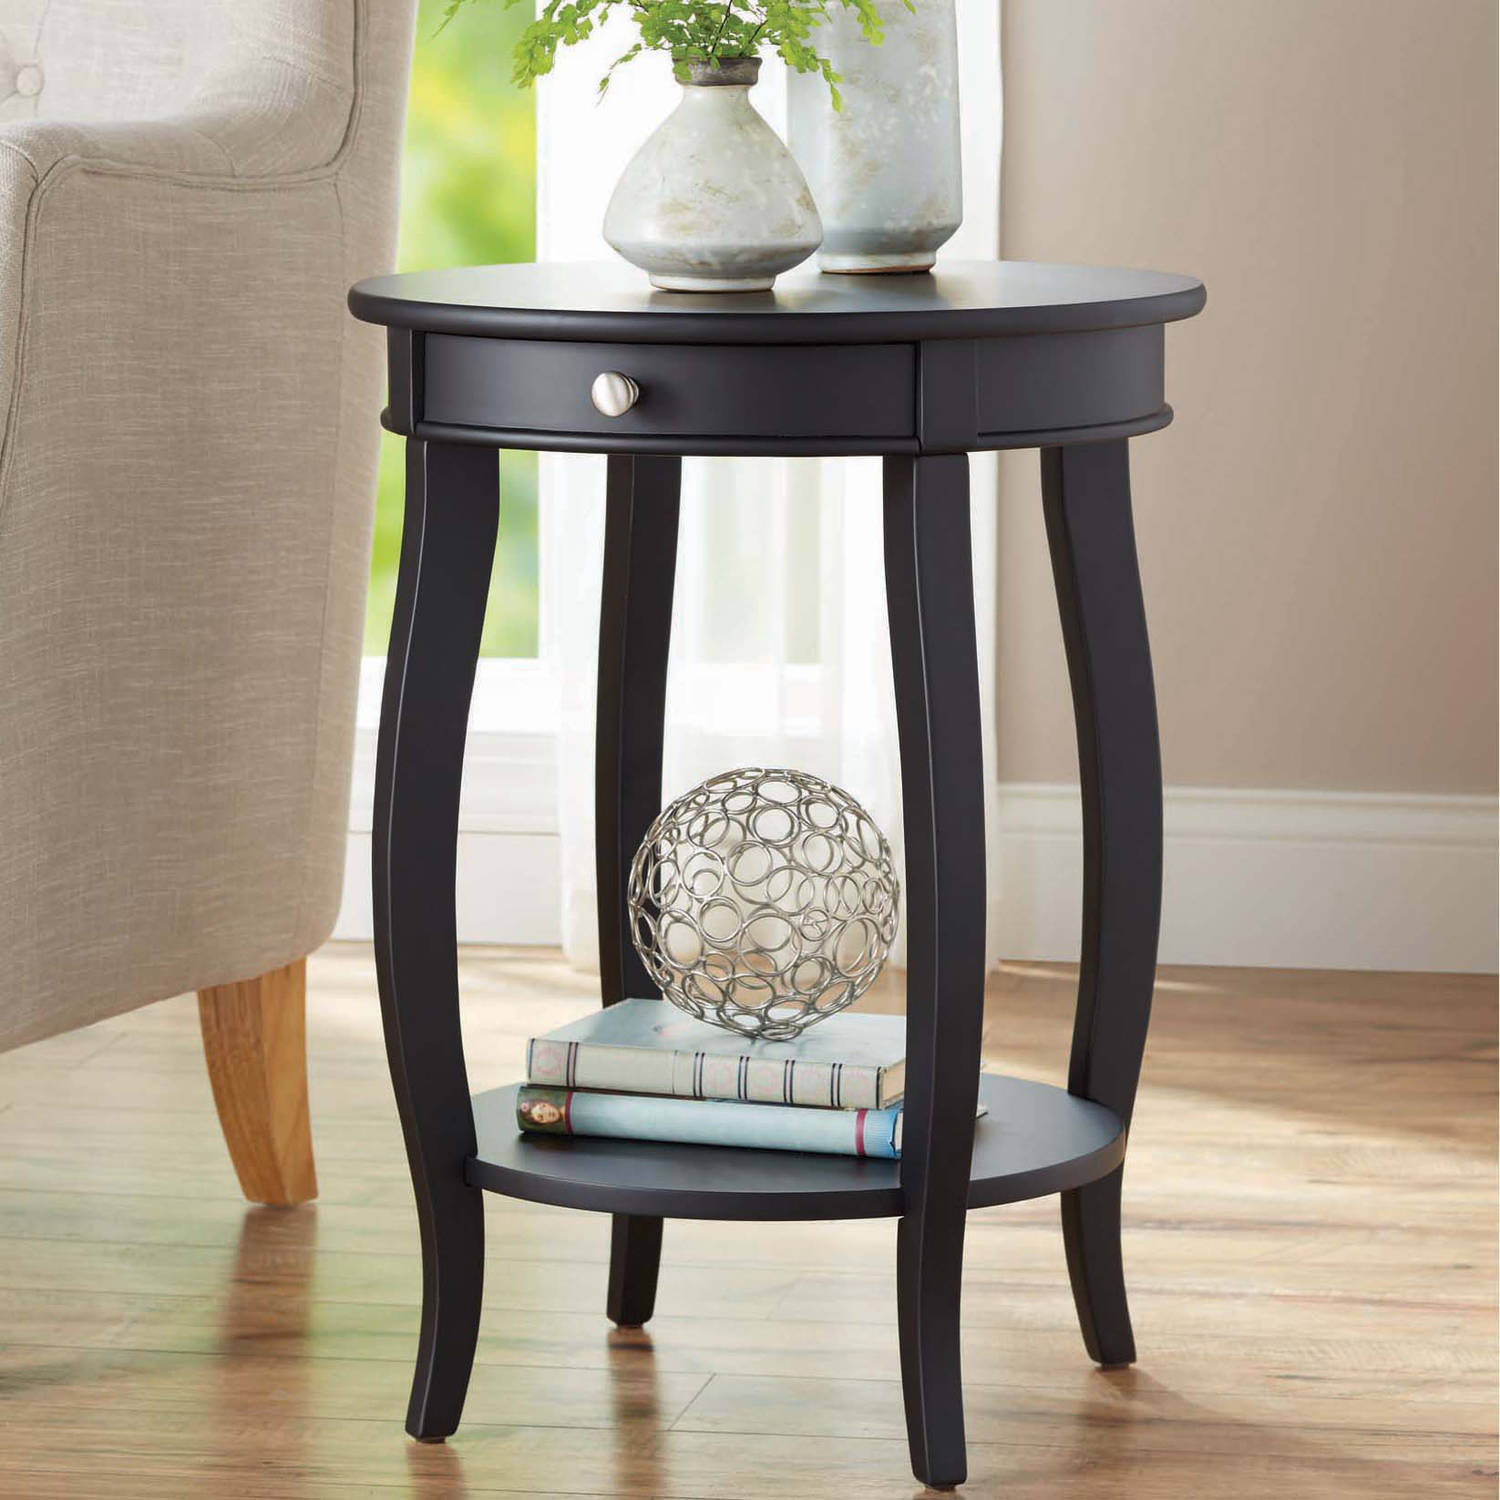 better homes gardens round accent table with drawer multiple gray wood colors copper hairpin coffee painted ideas small ginger jar lamps screw legs kmart desk folding chair side